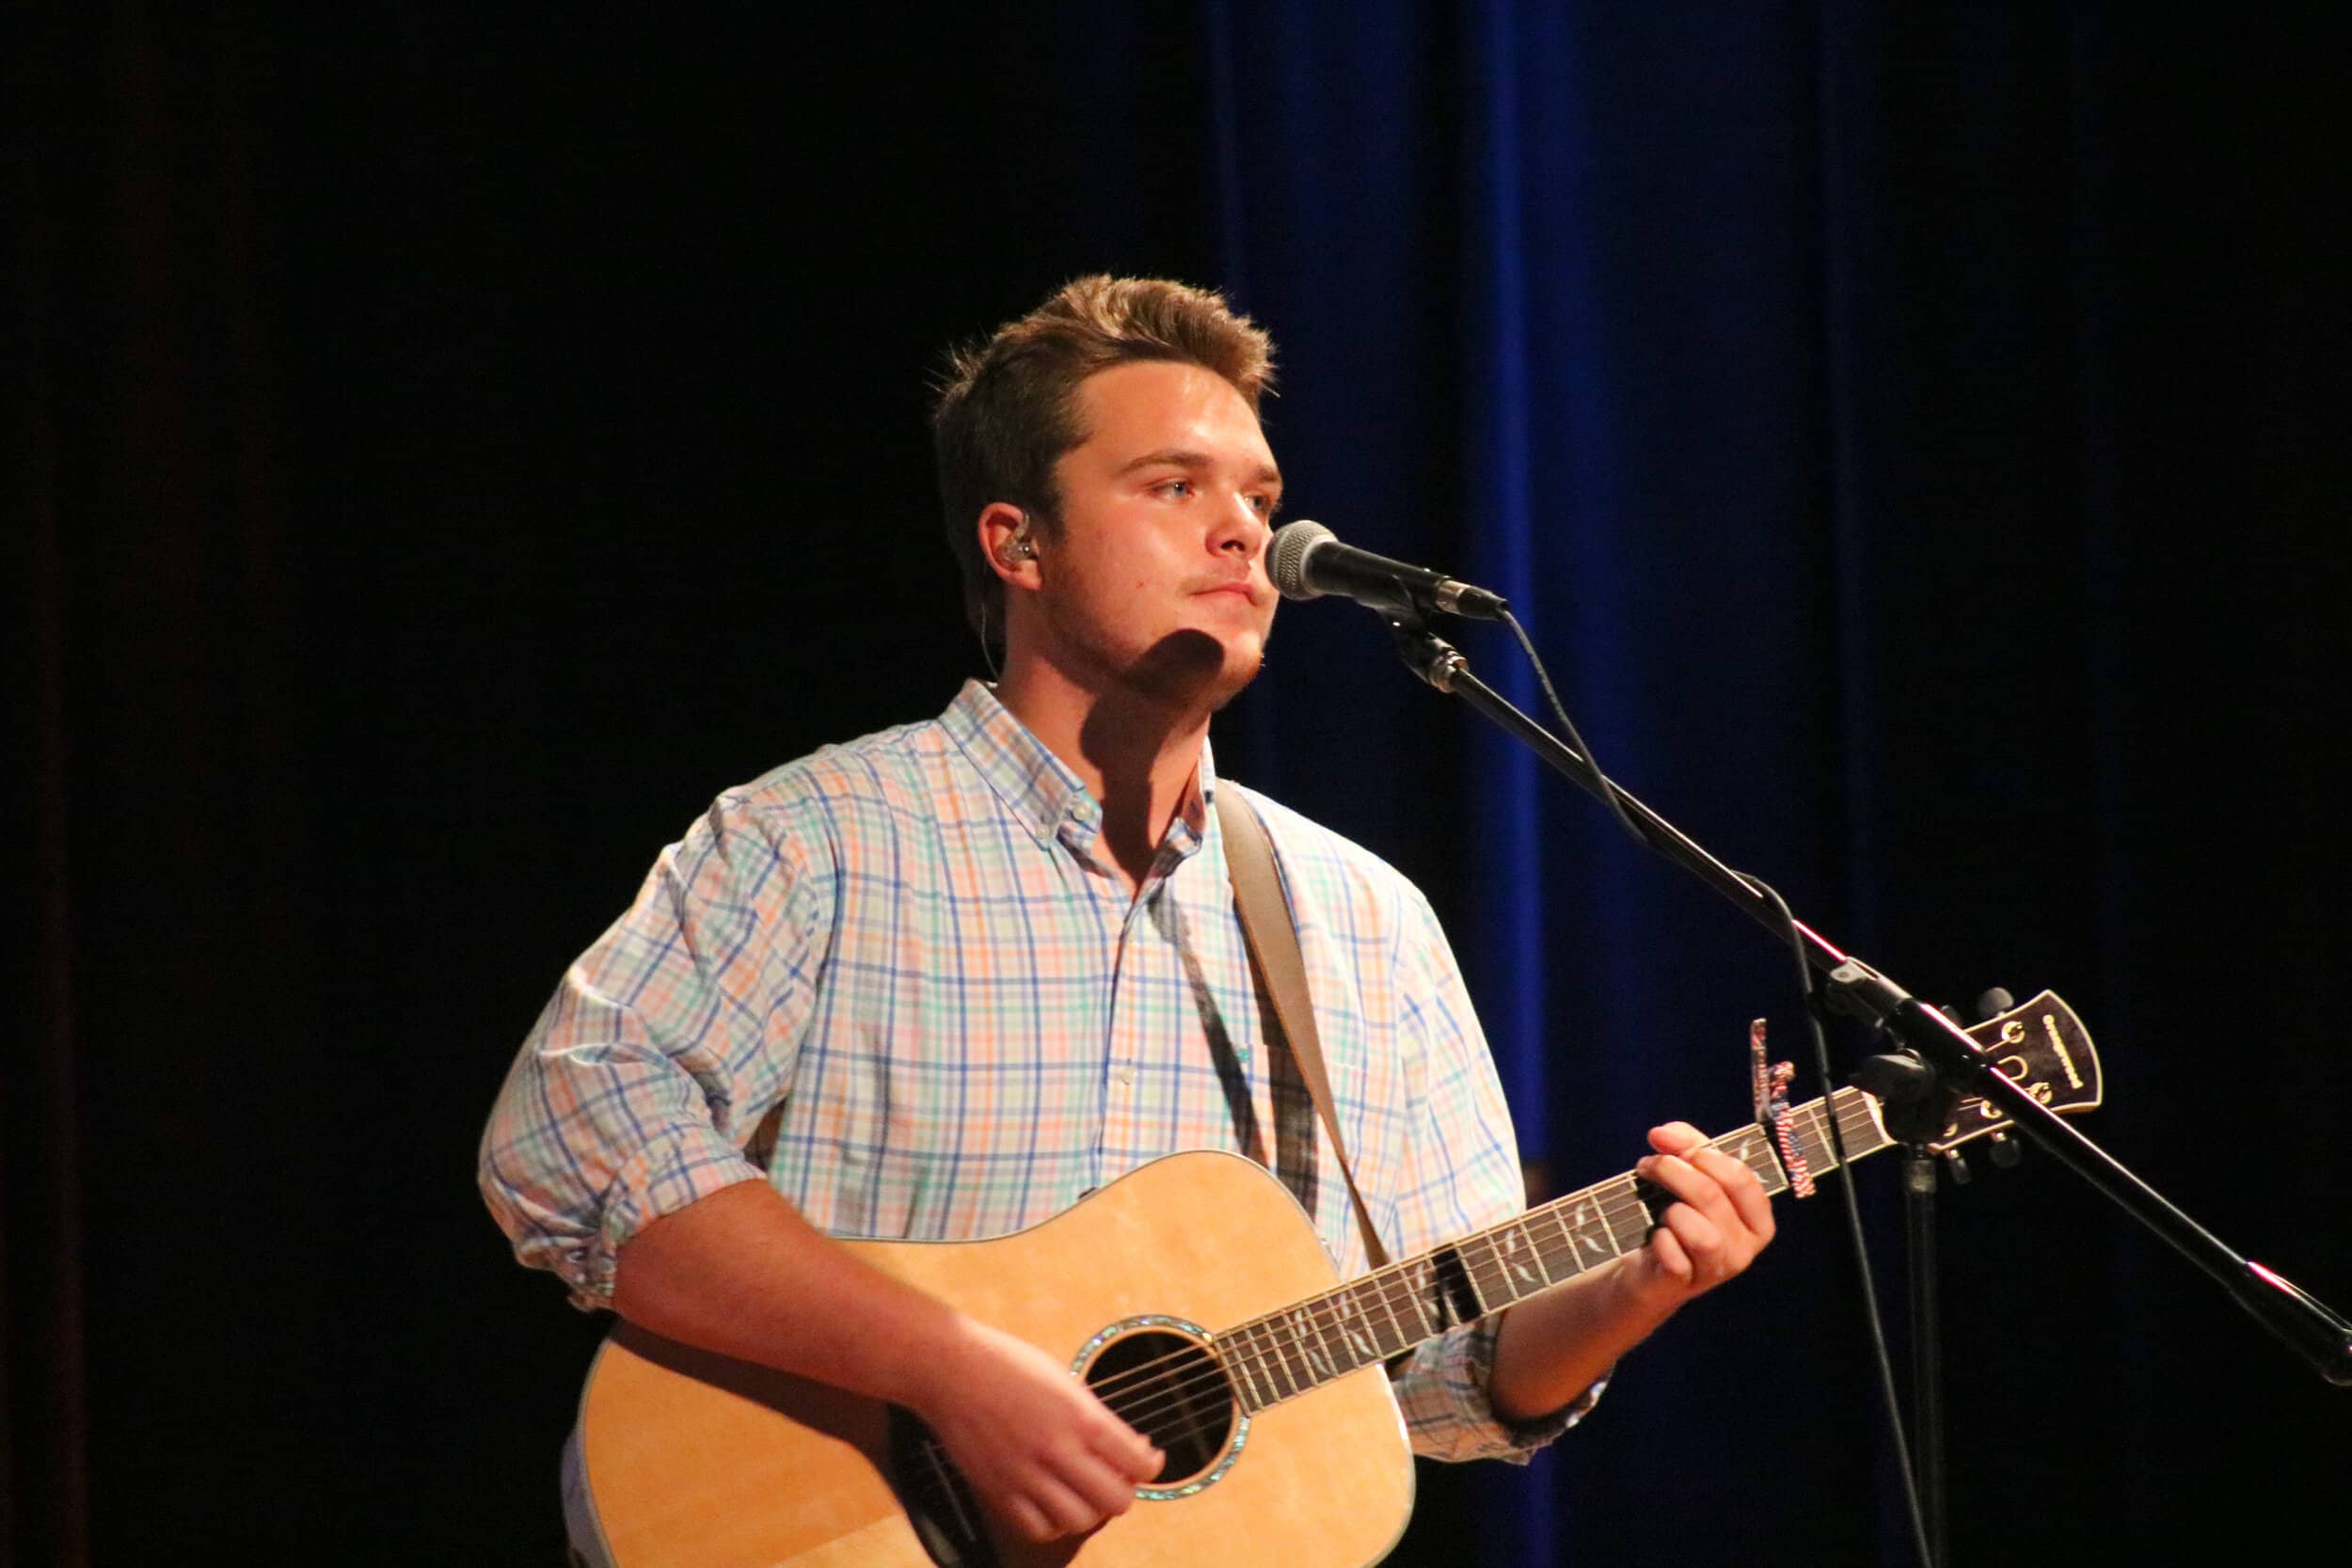 Matthew Shirk, a sophomore on vocals, leads the congregation in worship Thursday night at Baptist Collegiate Ministry.